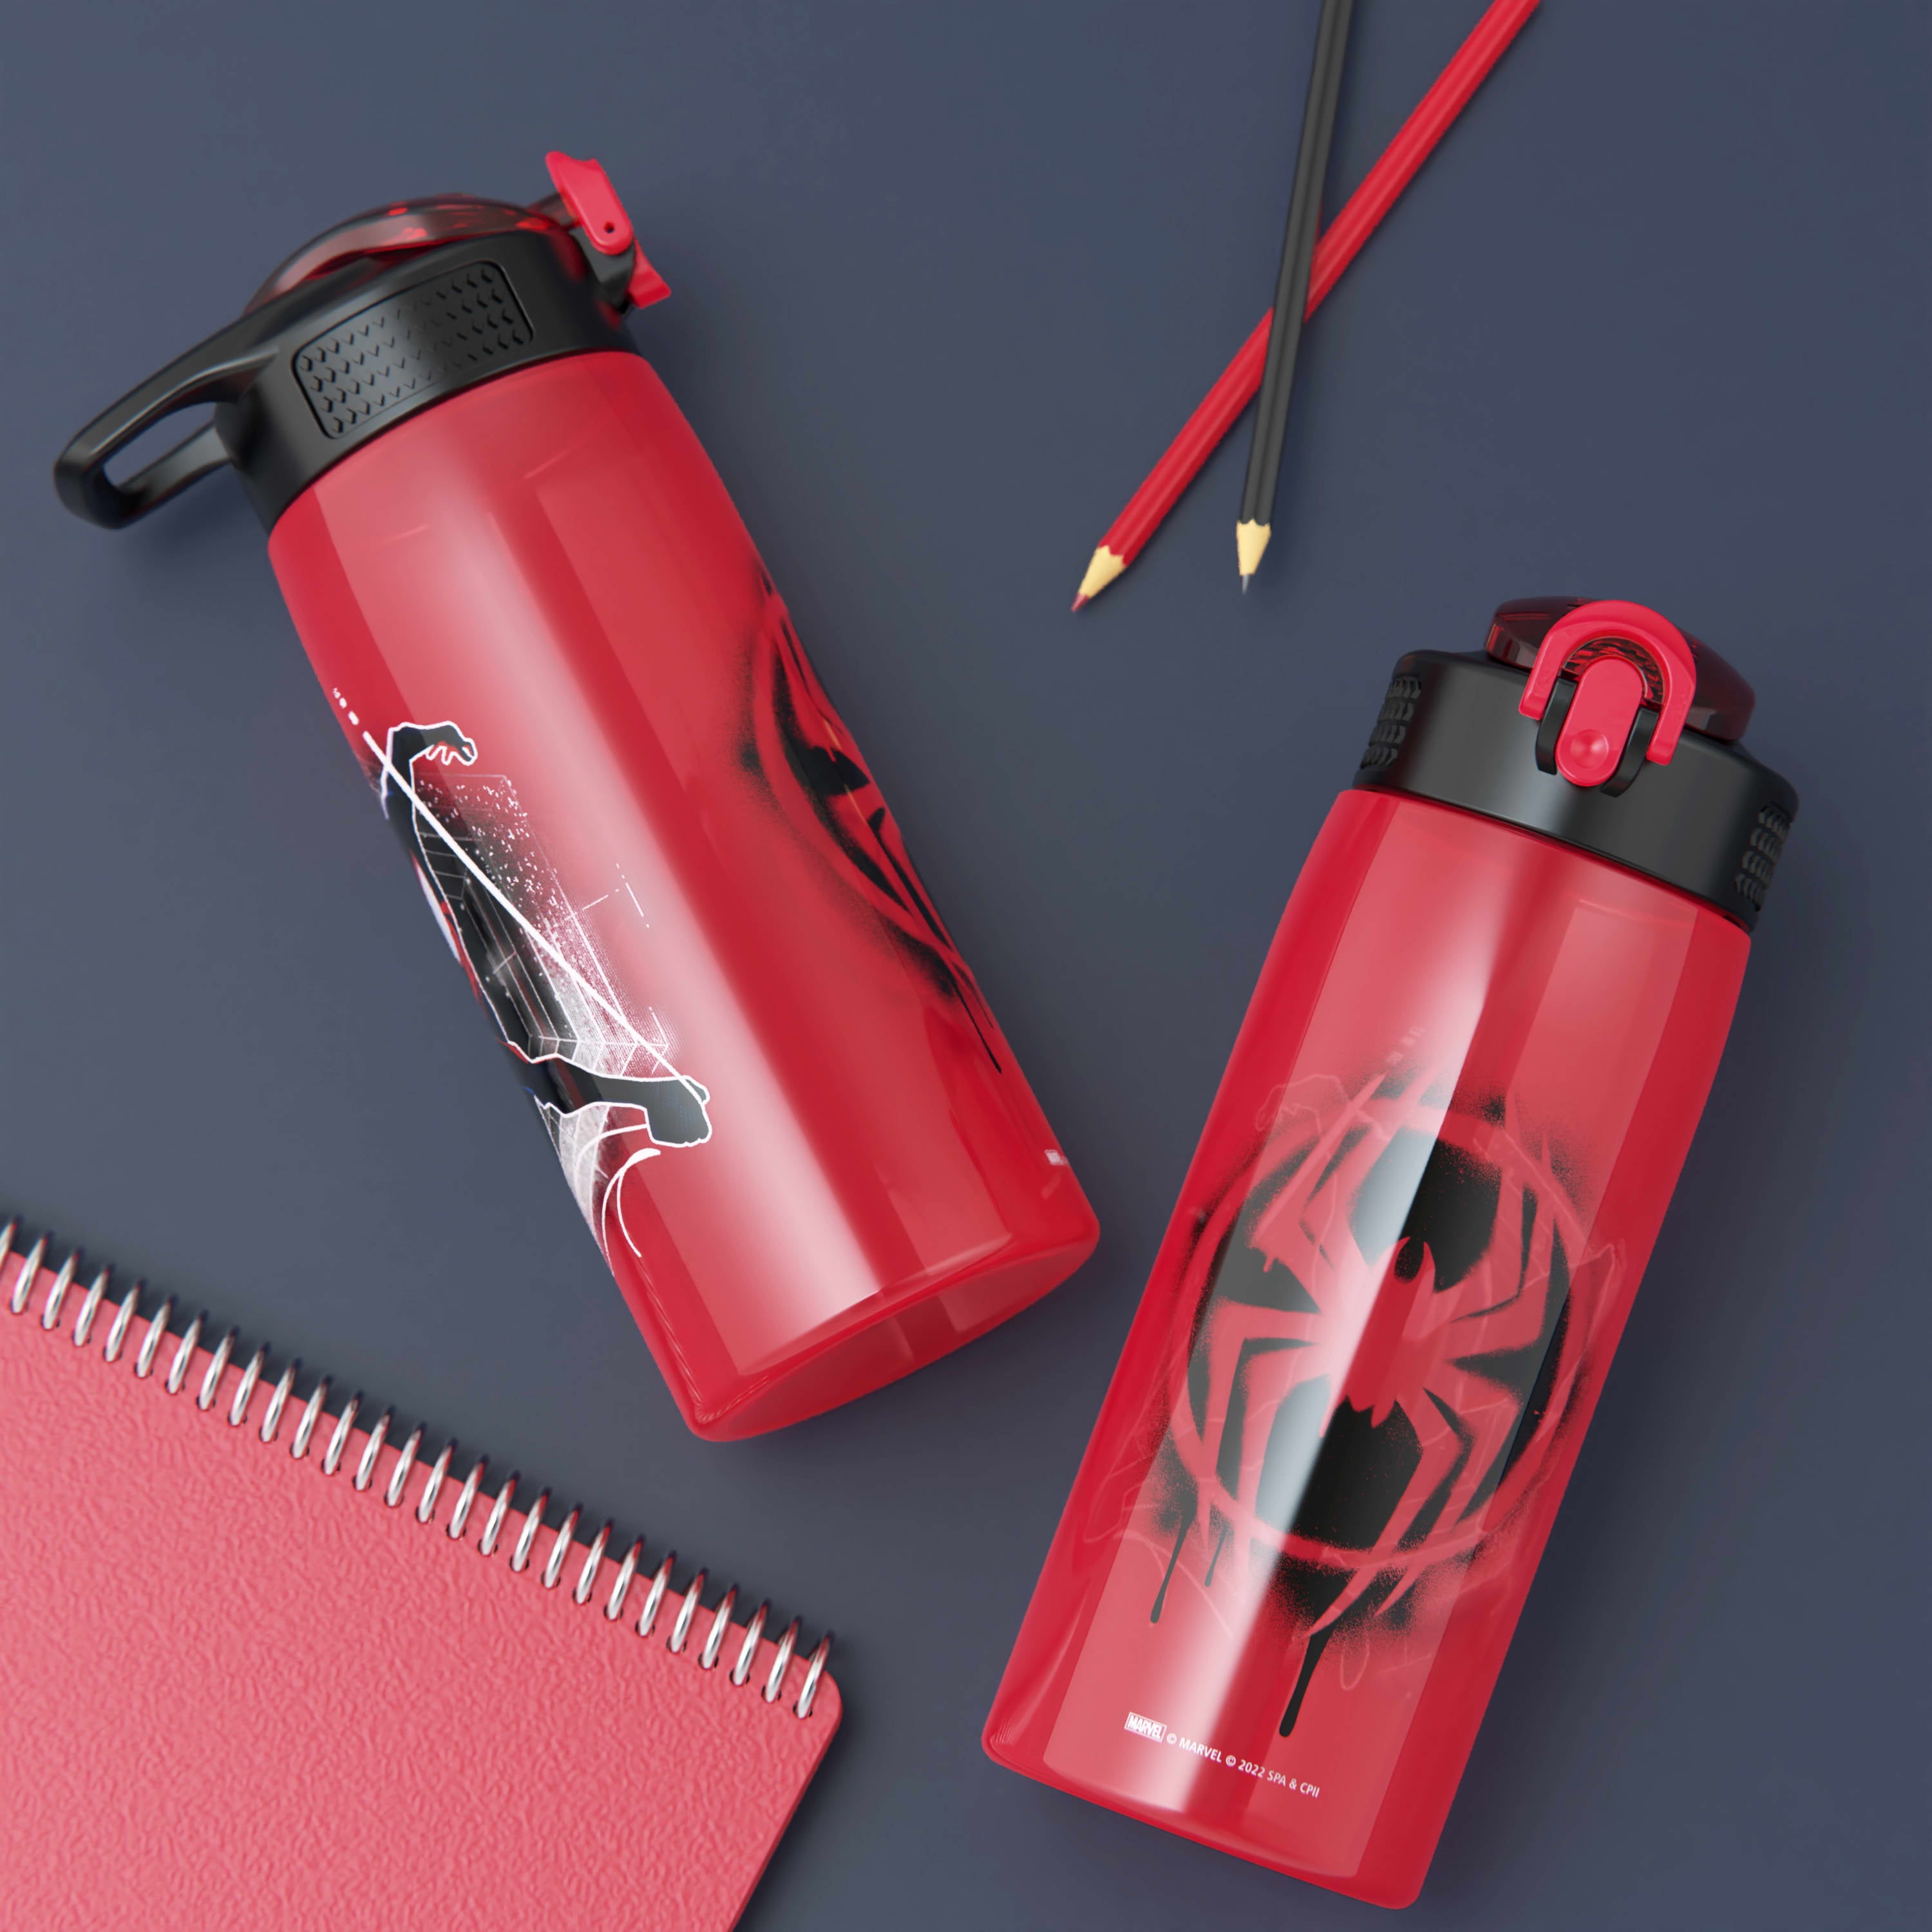 Super Heroes Hydrate: Nalgene Outdoor Announces Release of Water Bottles  Featuring Marvel Super Heroes